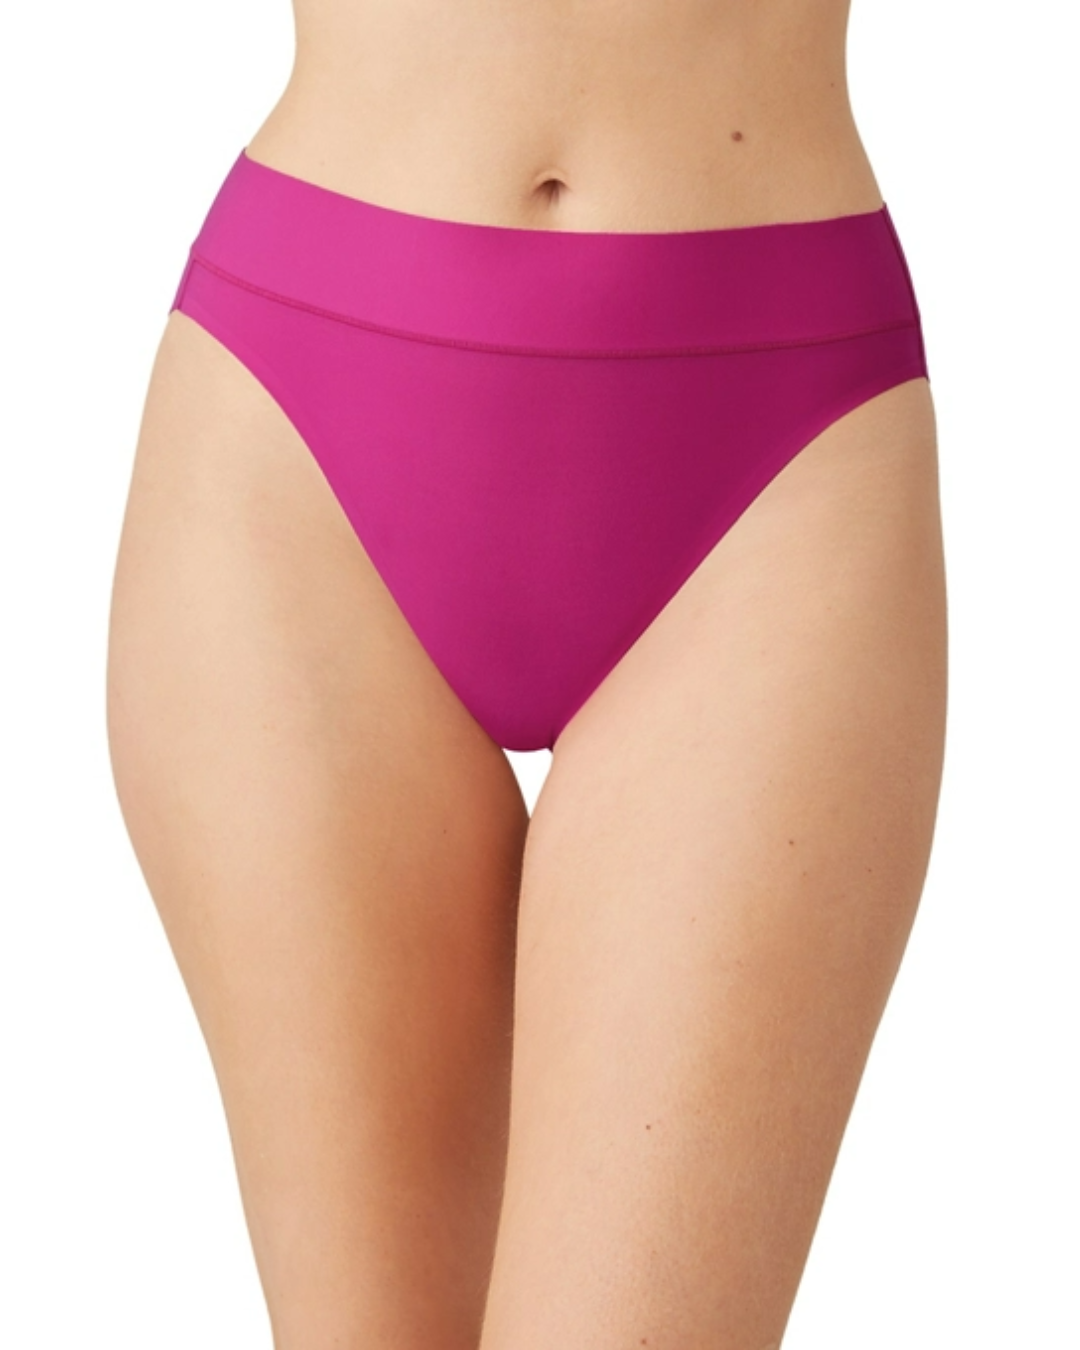 Wacoal At Ease High Cut Brief (More colors available) - 871308